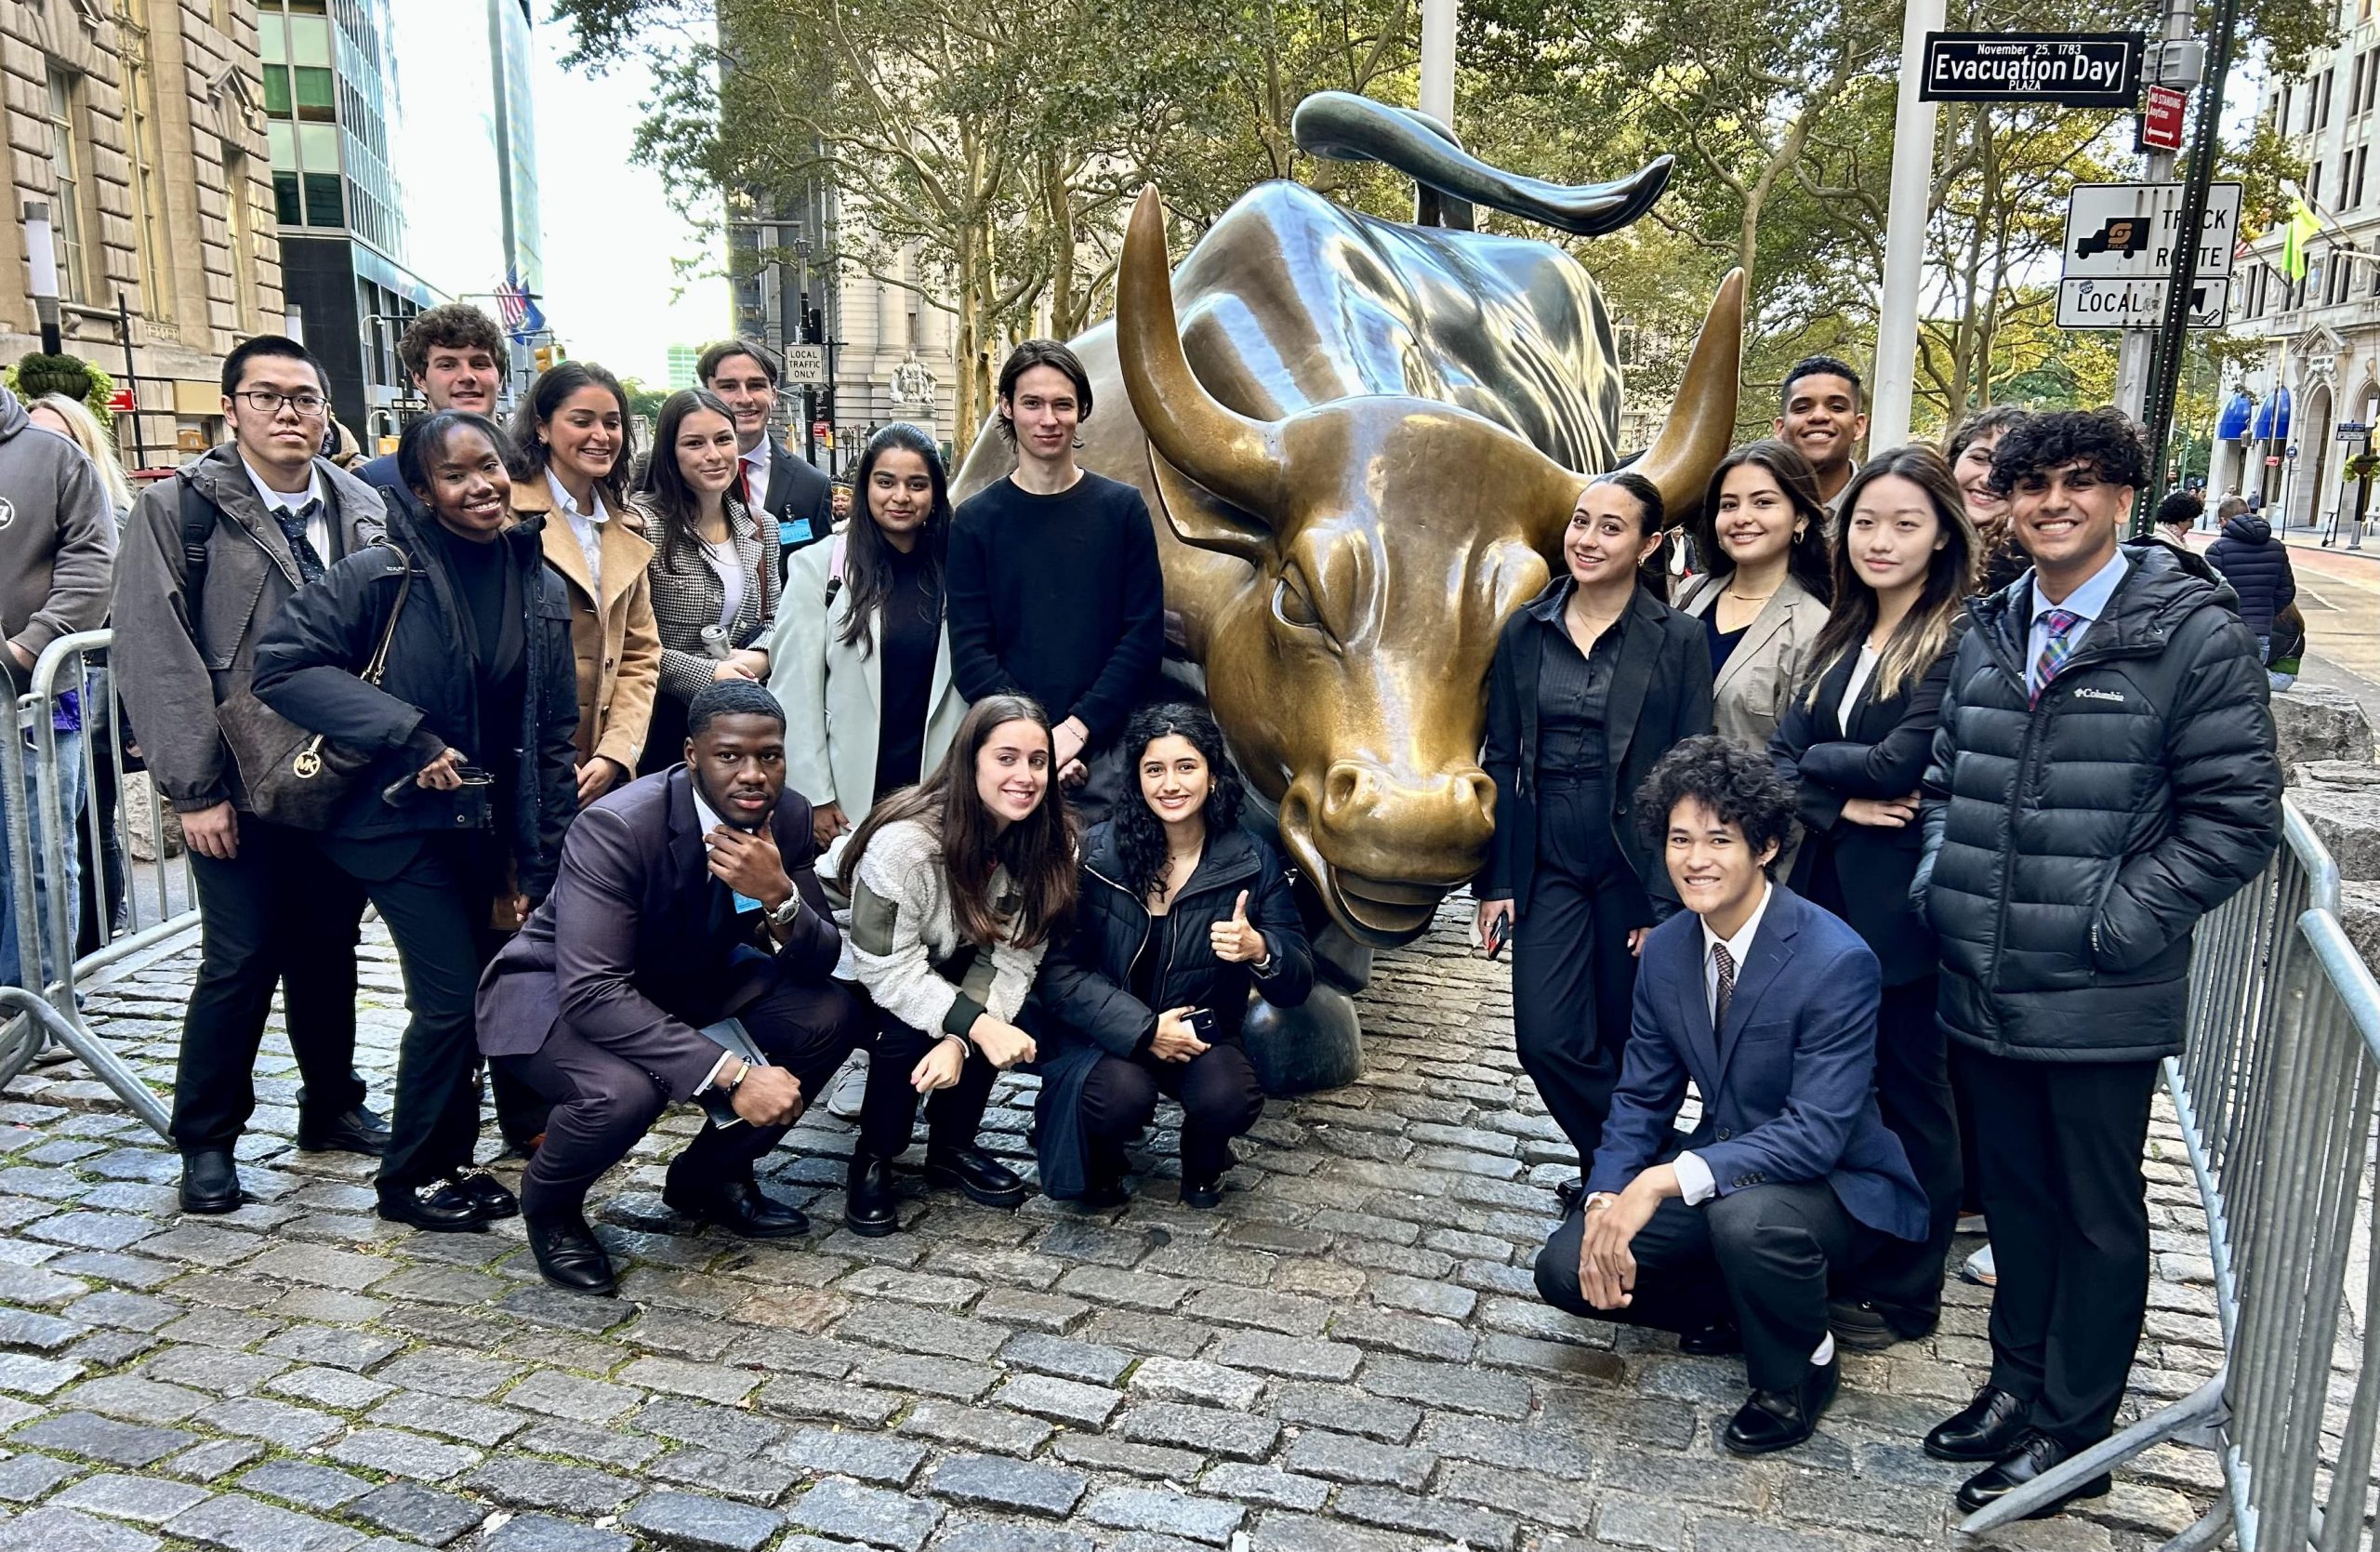 Students pose for a photo on Wall Street